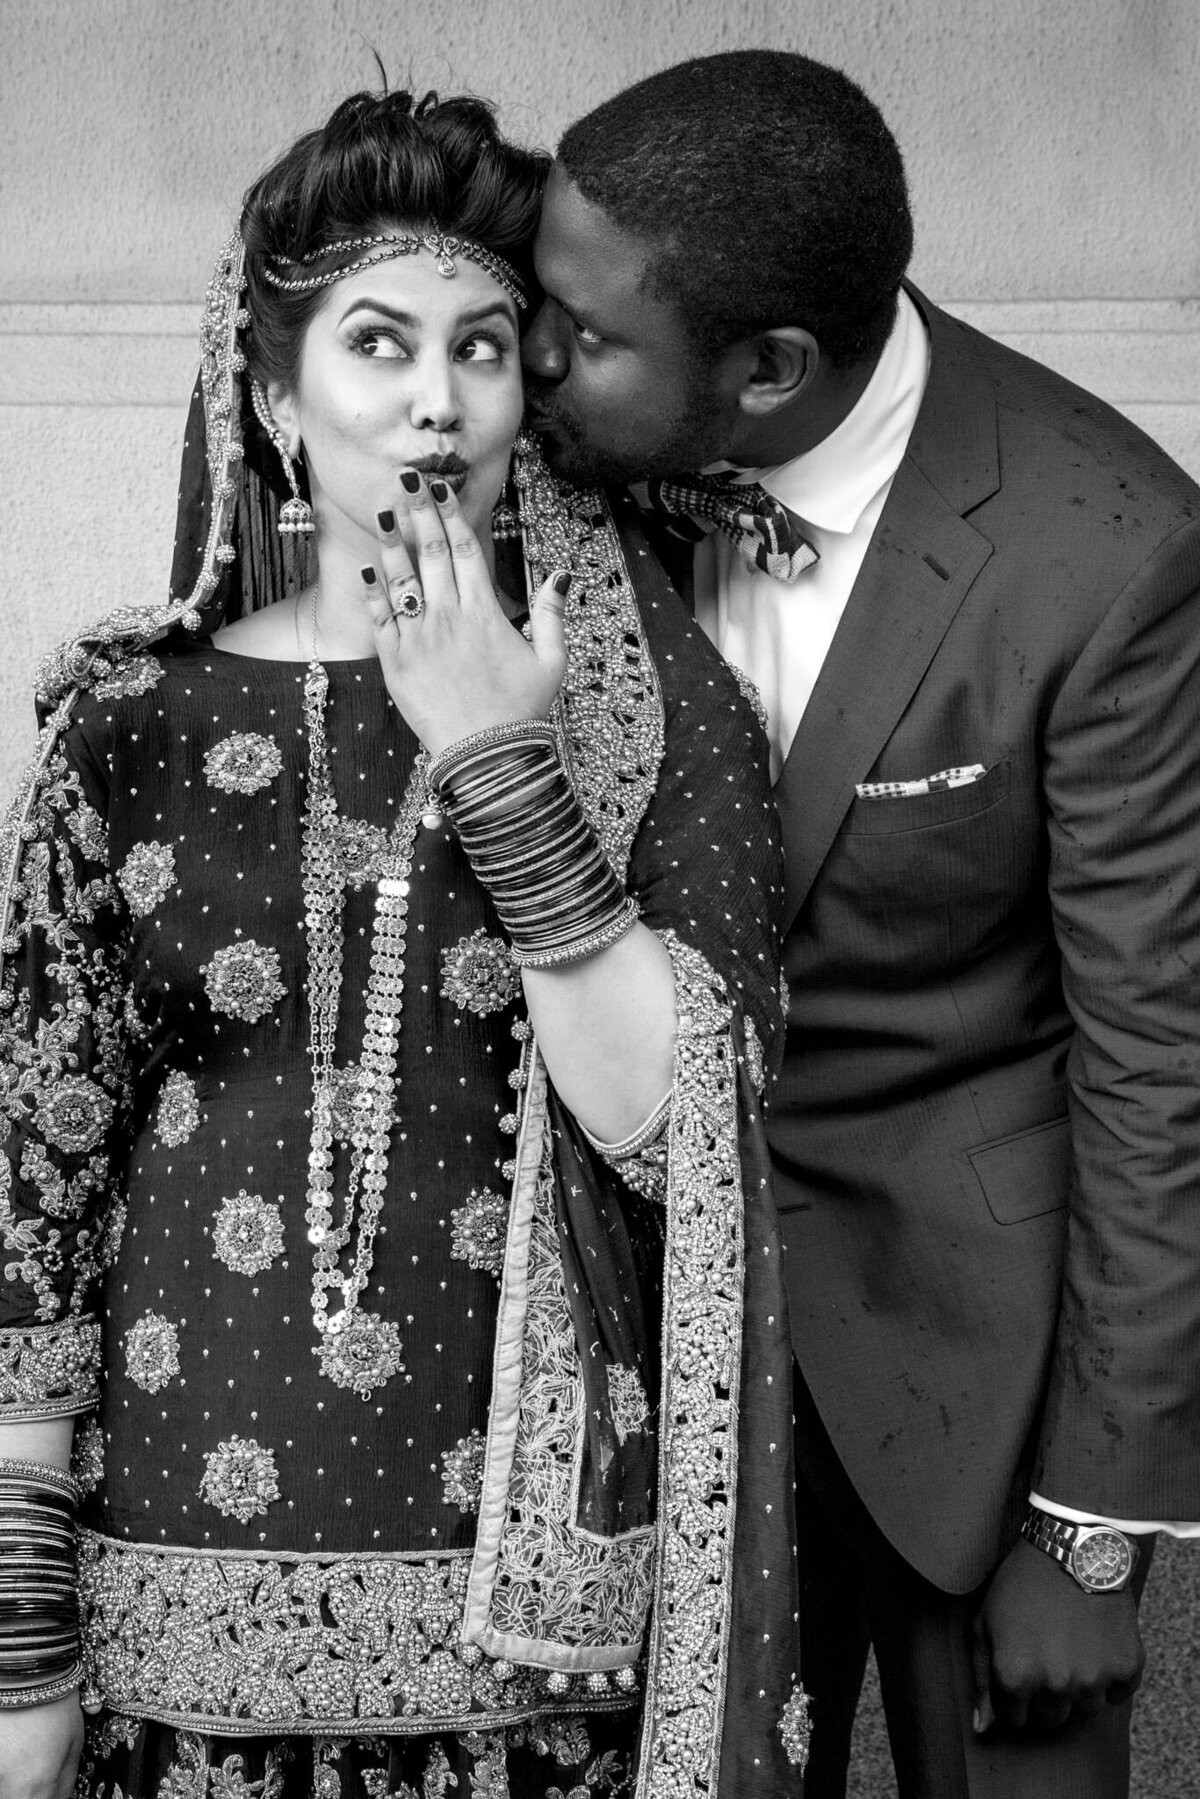 A black and white photo of a groom kissing his partner's cheek.